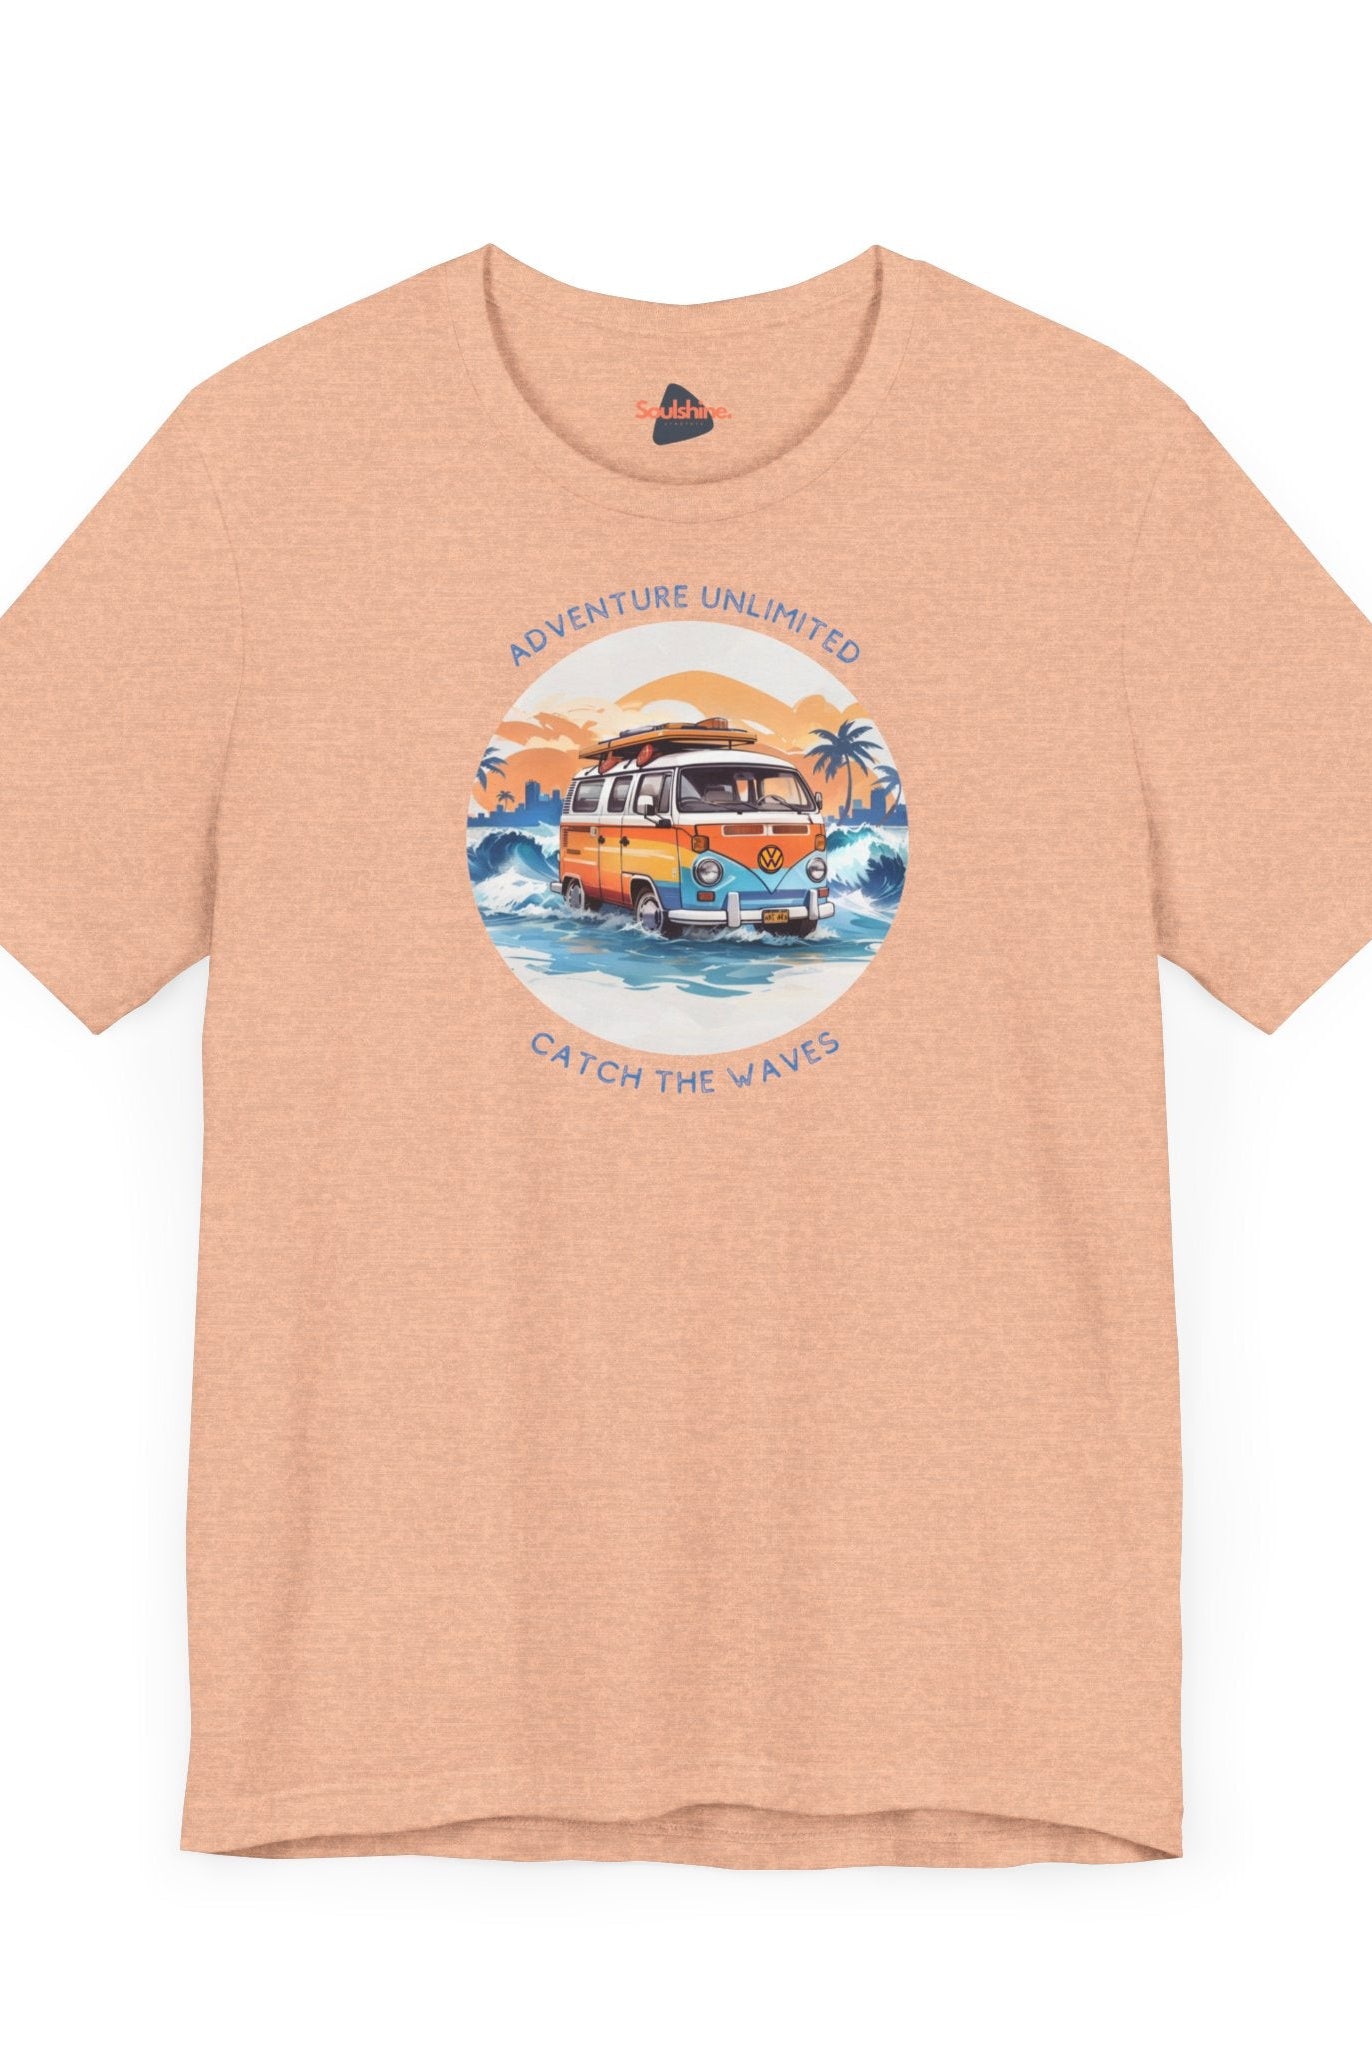 Printed direct-to-garment surfing t-shirt with van and surfboard graphic by Soulshinecreators